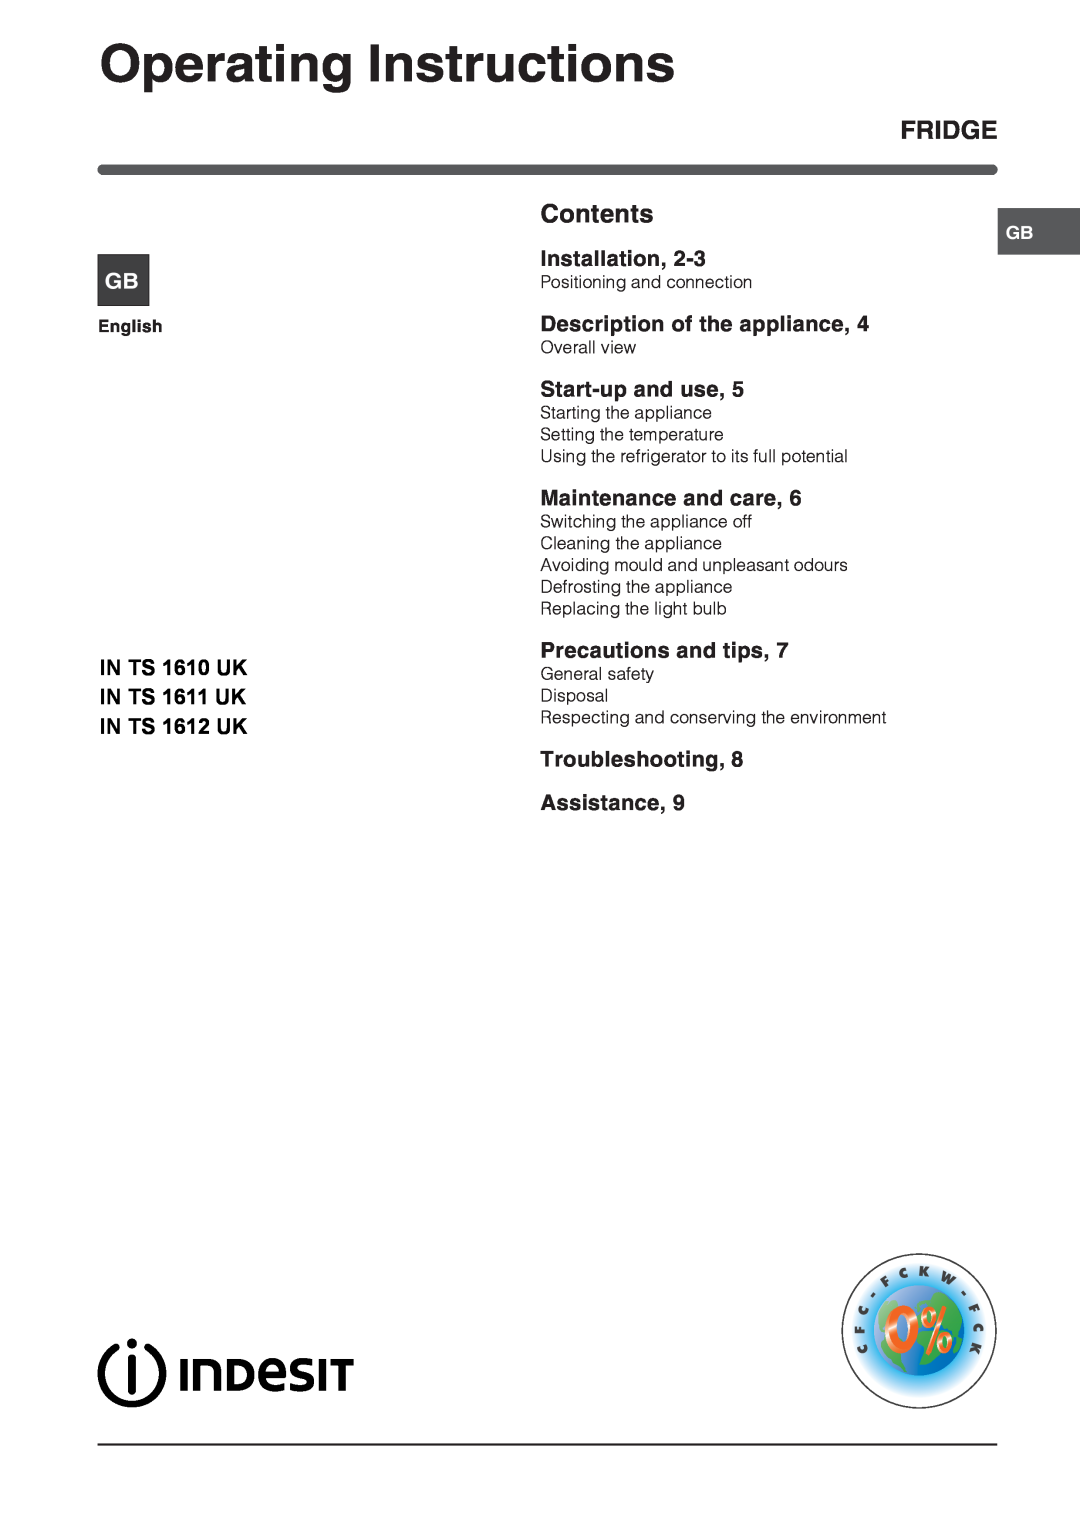 Indesit IN TS 1610 UK manual Operating Instructions, Installation, Description of the appliance, Start-up and use, English 